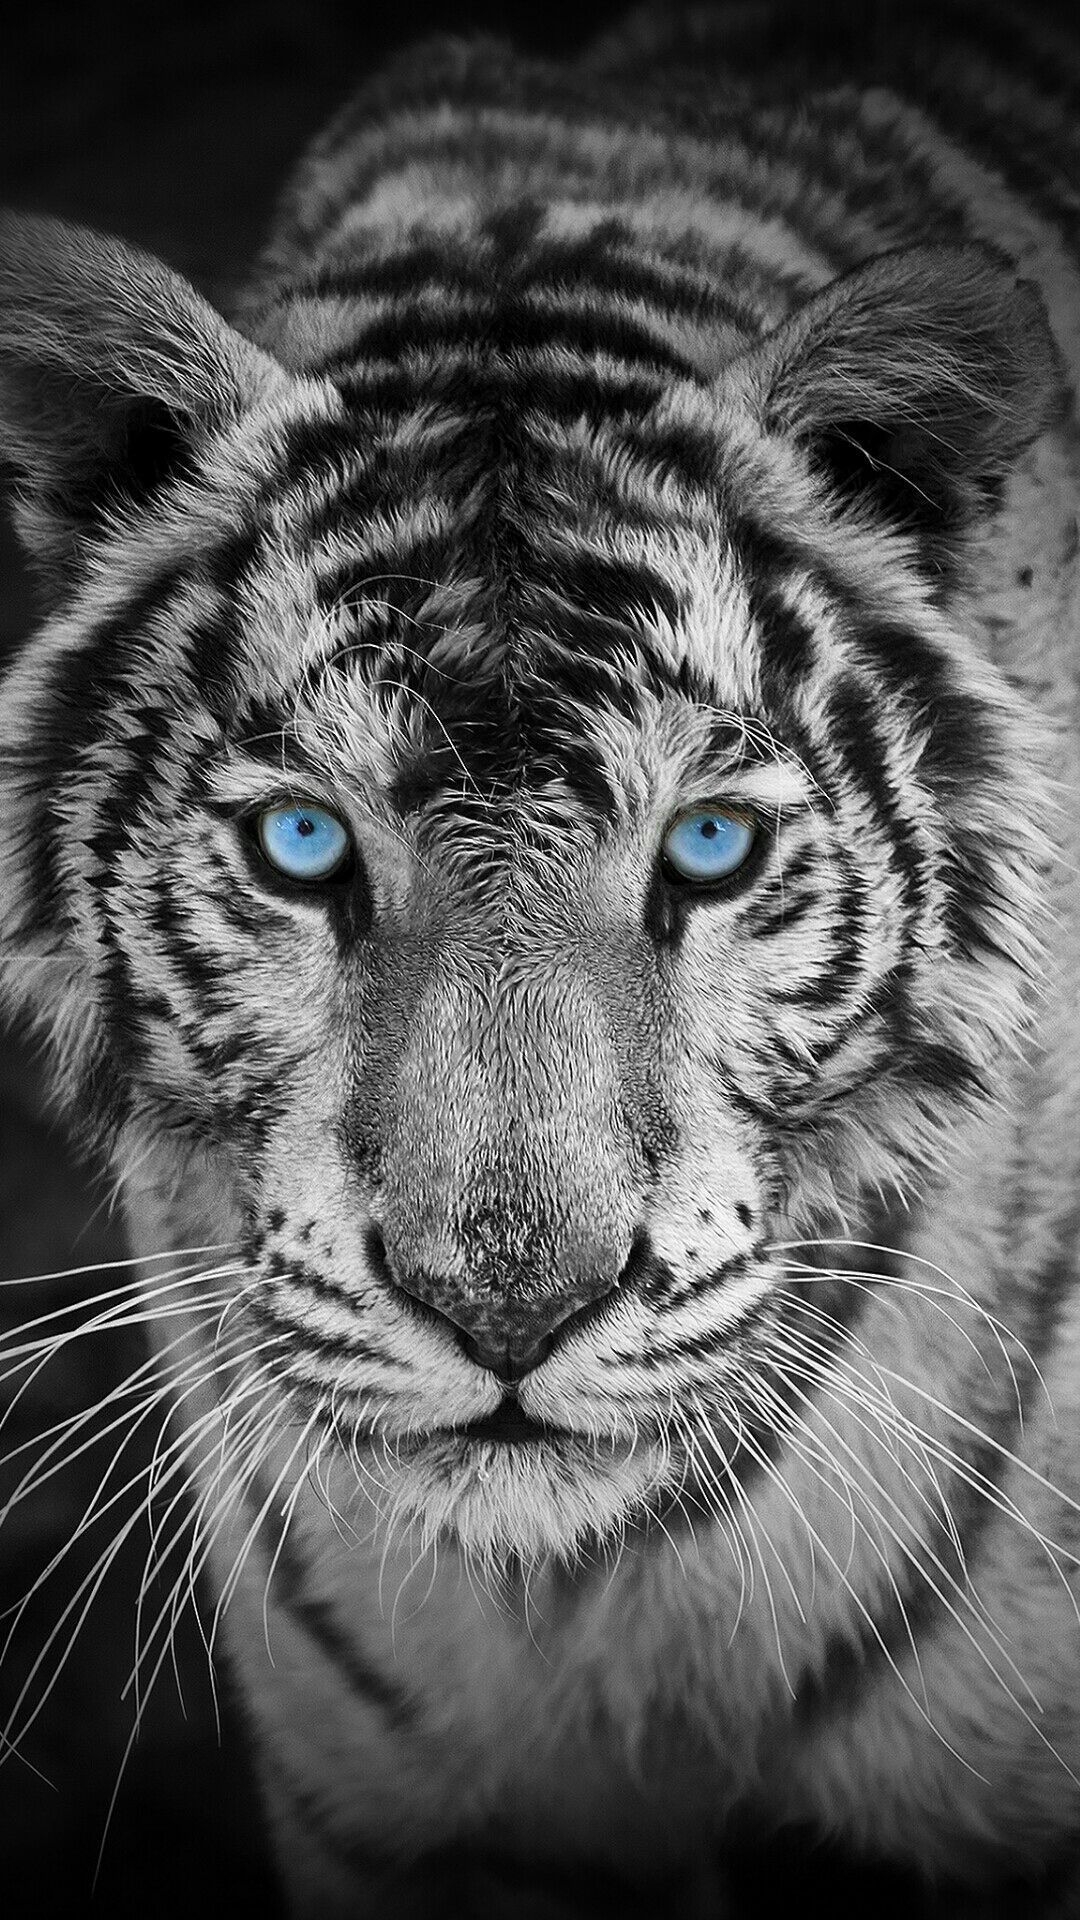 Black And White Tiger Background Animals Wallpaper Ideas. Hipster wallpaper, Tiger wallpaper, iPhone wallpaper